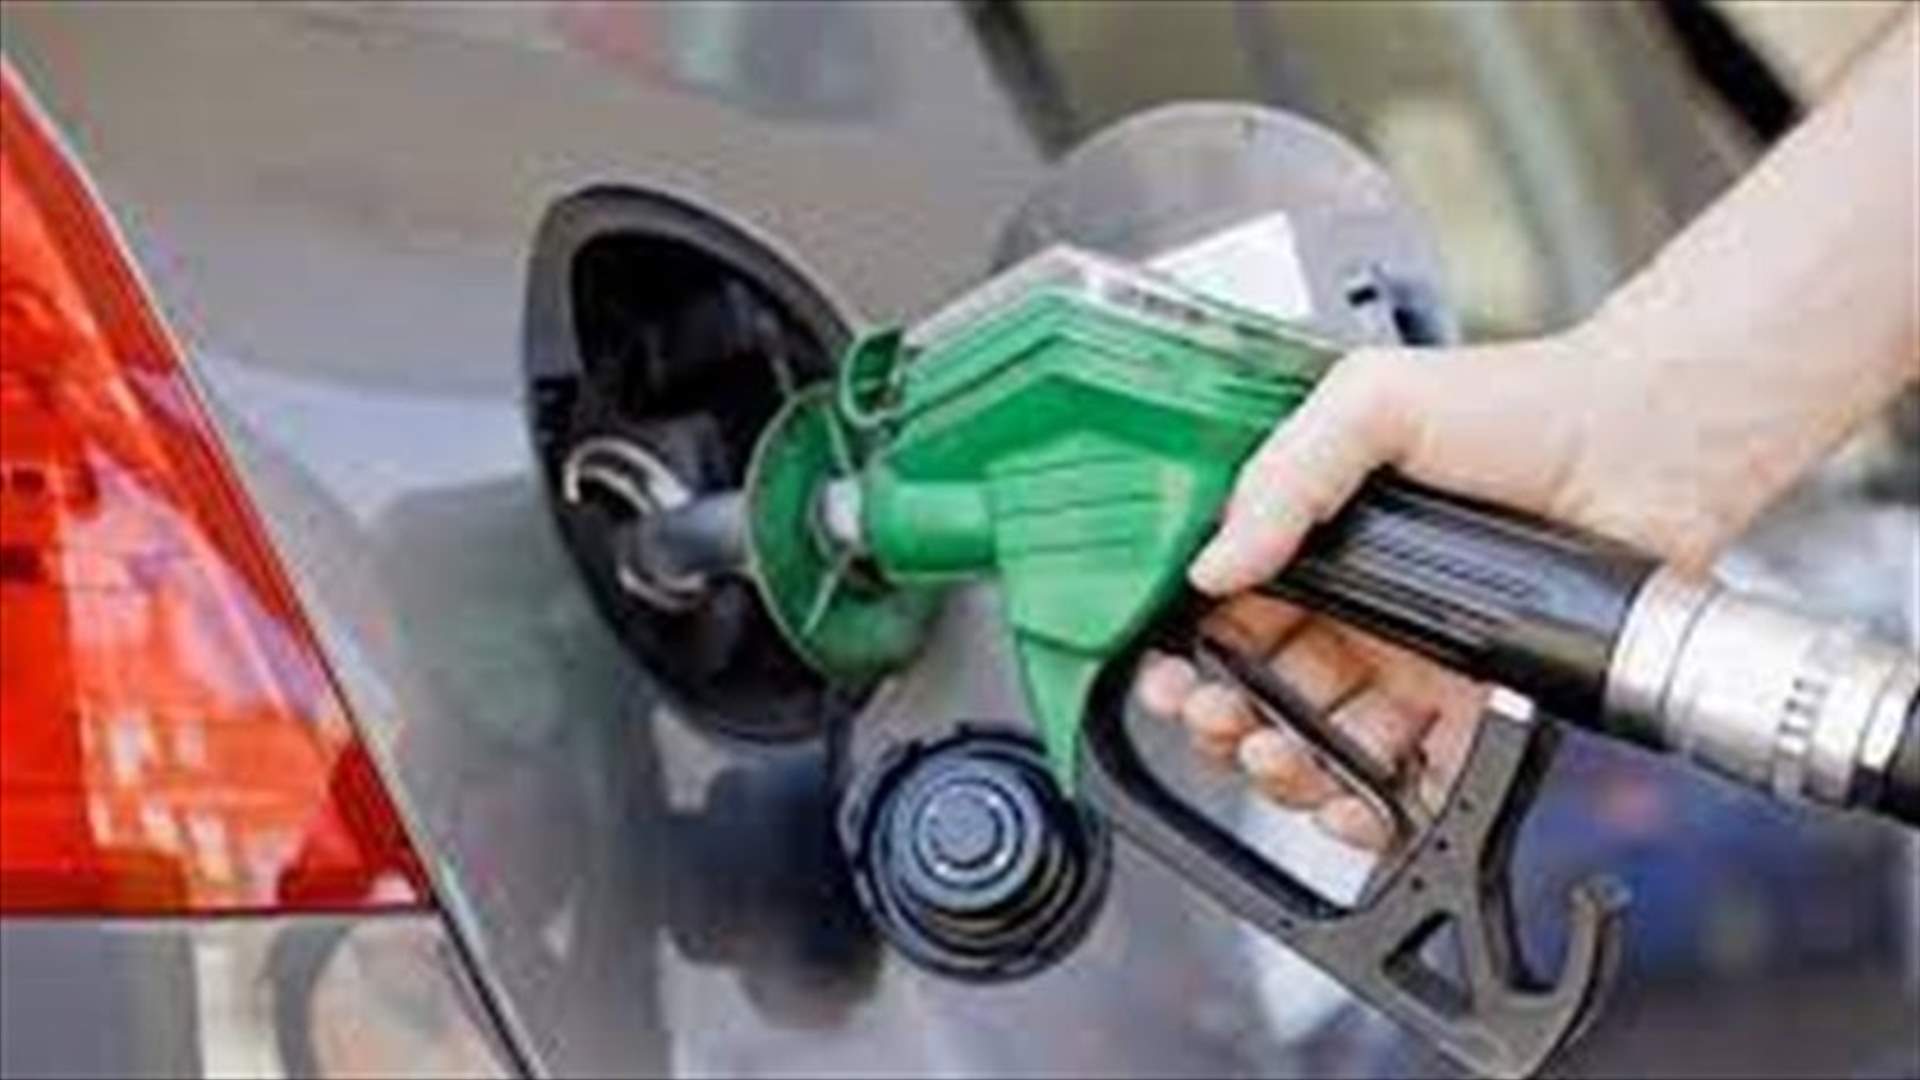 Prices of gasoline see further increase